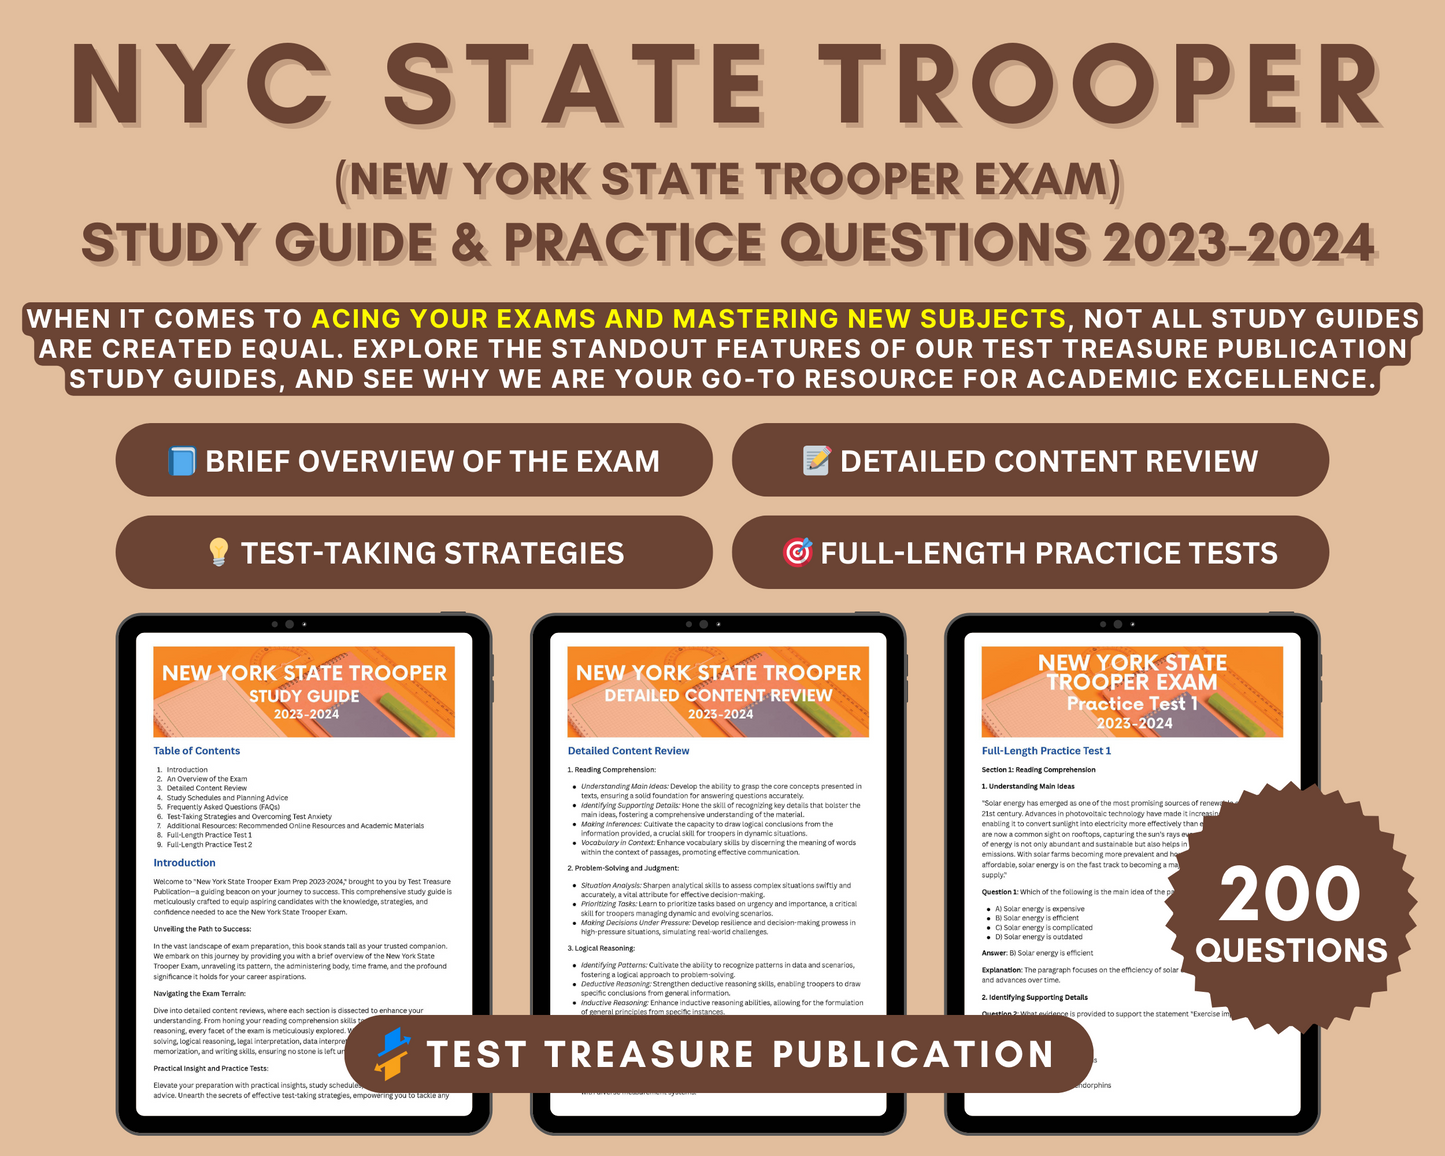 New York State Trooper Exam Prep 2023-2024: In-Depth Content Review, Practice Tests for Aspiring State Troopers